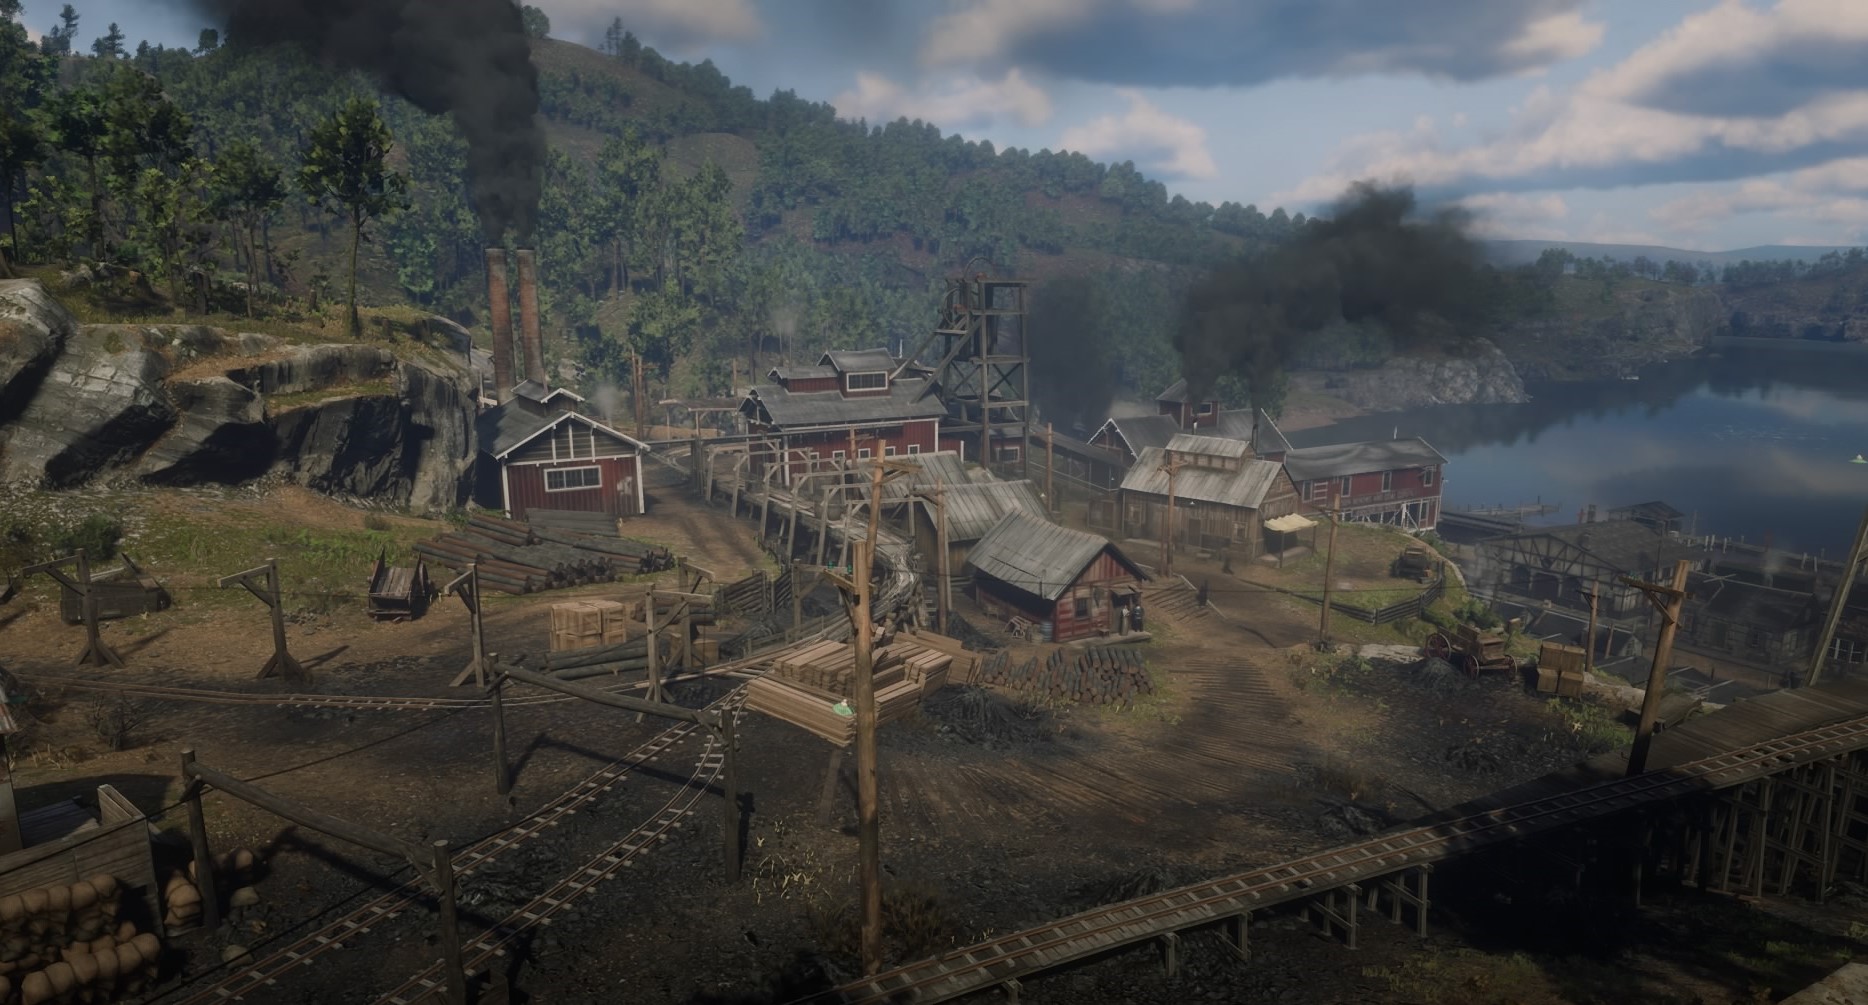 A frontier, railroad town in Red Dead Redemption 2.